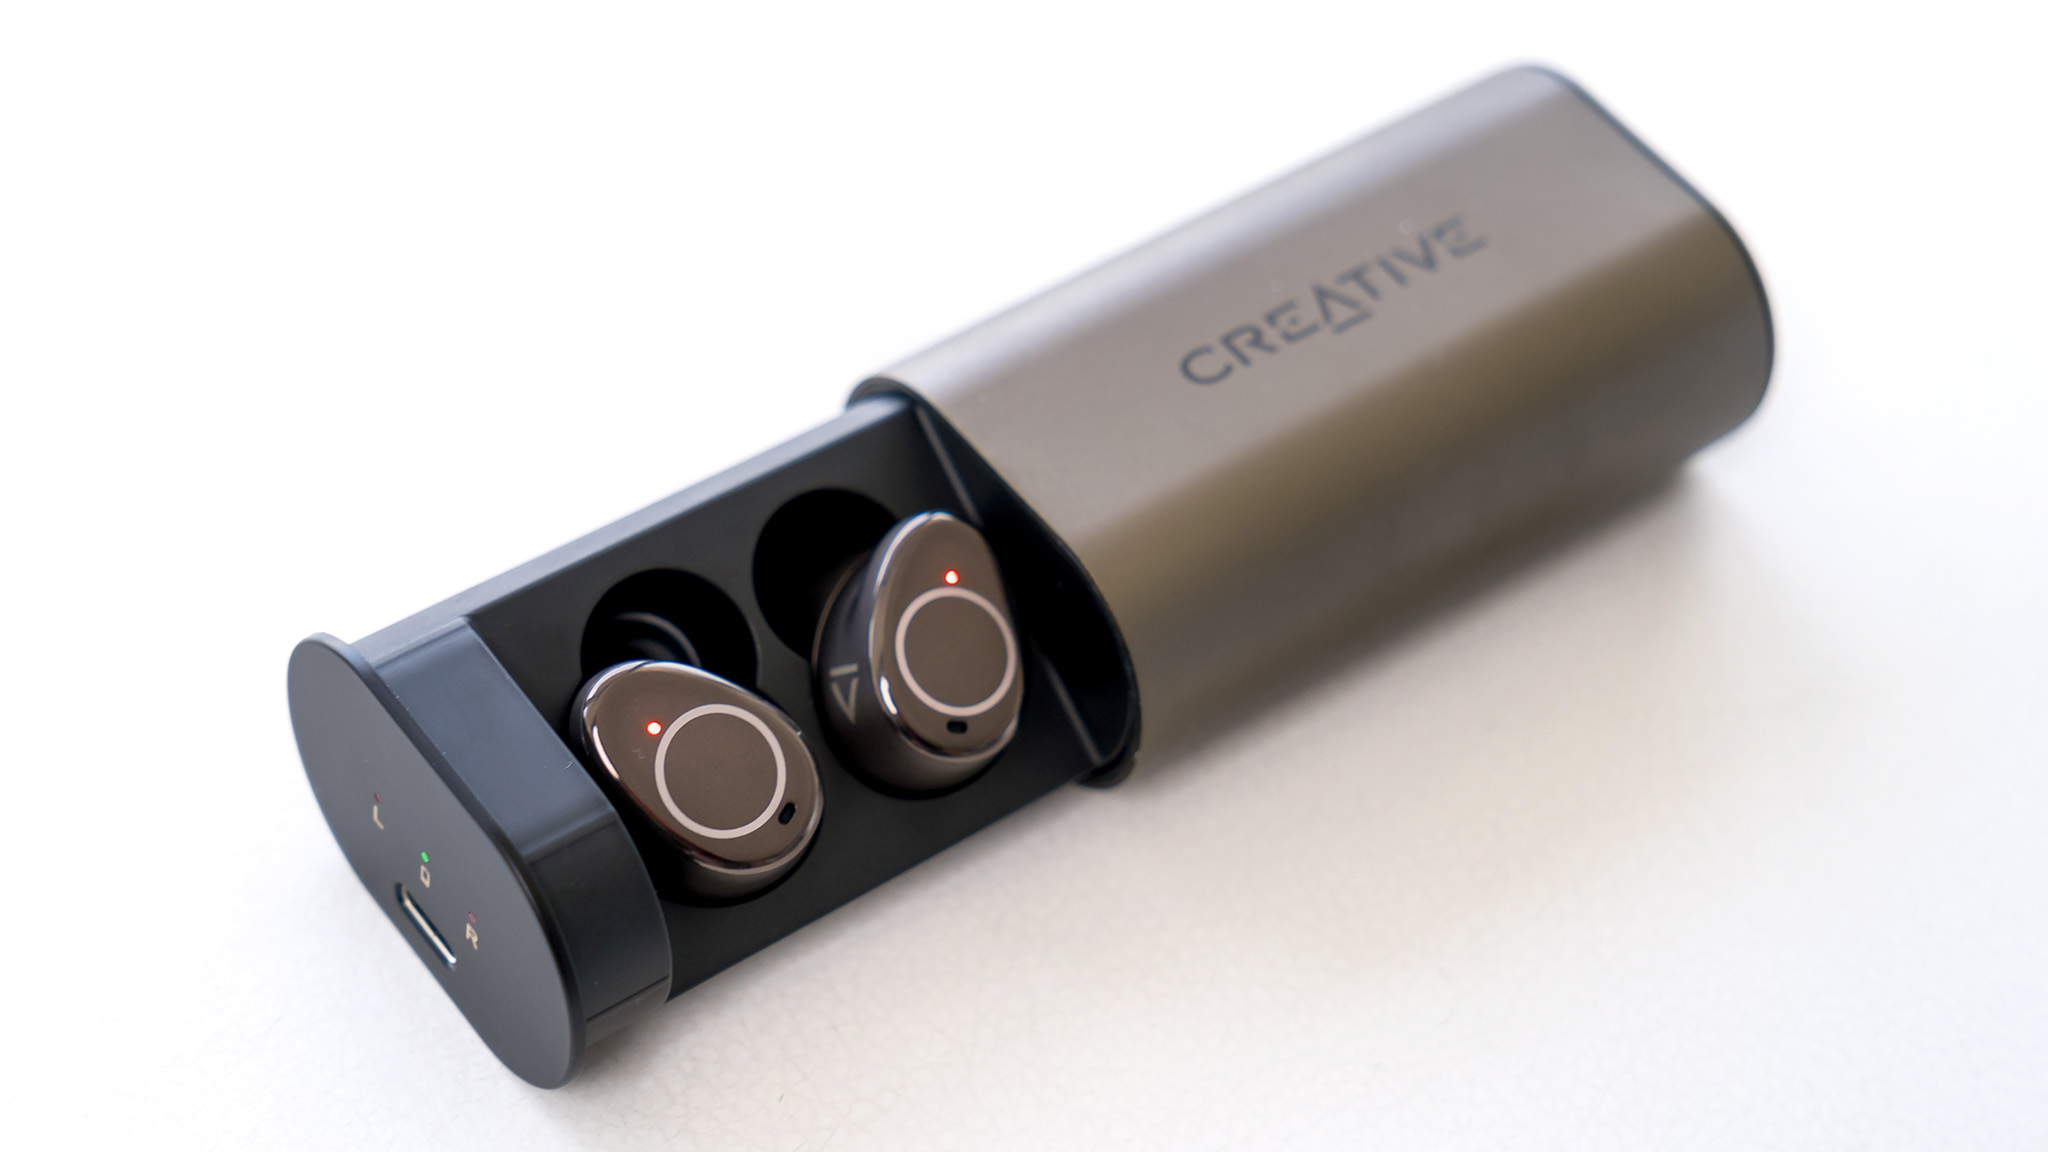 Case reveals Creative Outlier Pro earbuds.